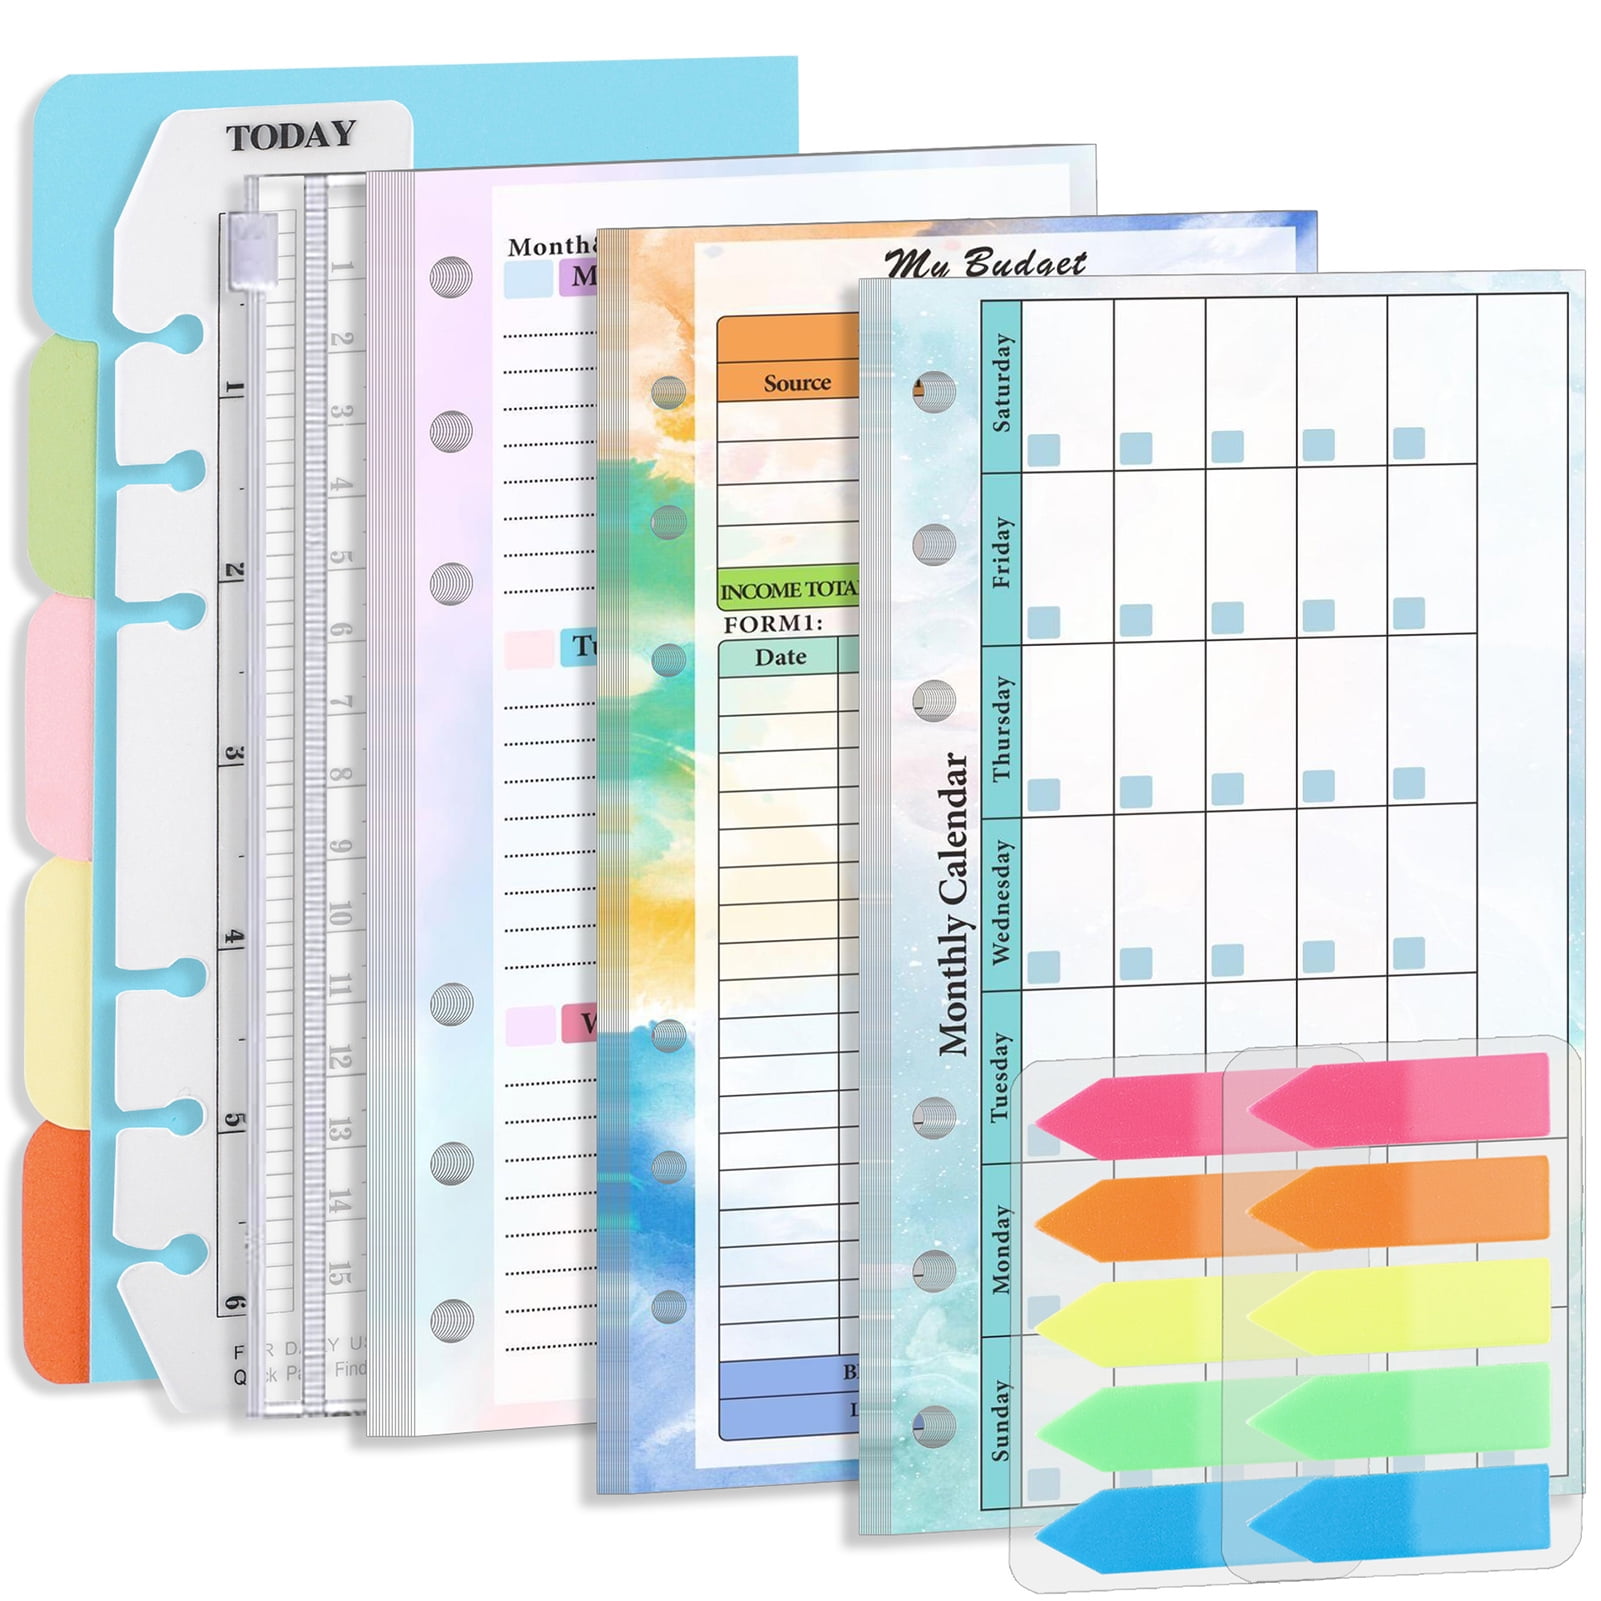  Toplive A6 Planner Refill Paper Budget Shhets 82 Sheet  Colorful Monthly Weekly Planner Losse Leaf Inserts 6 Hole Expense Tracker  for A6 Binder Cover Bill Saving Organizer : Office Products